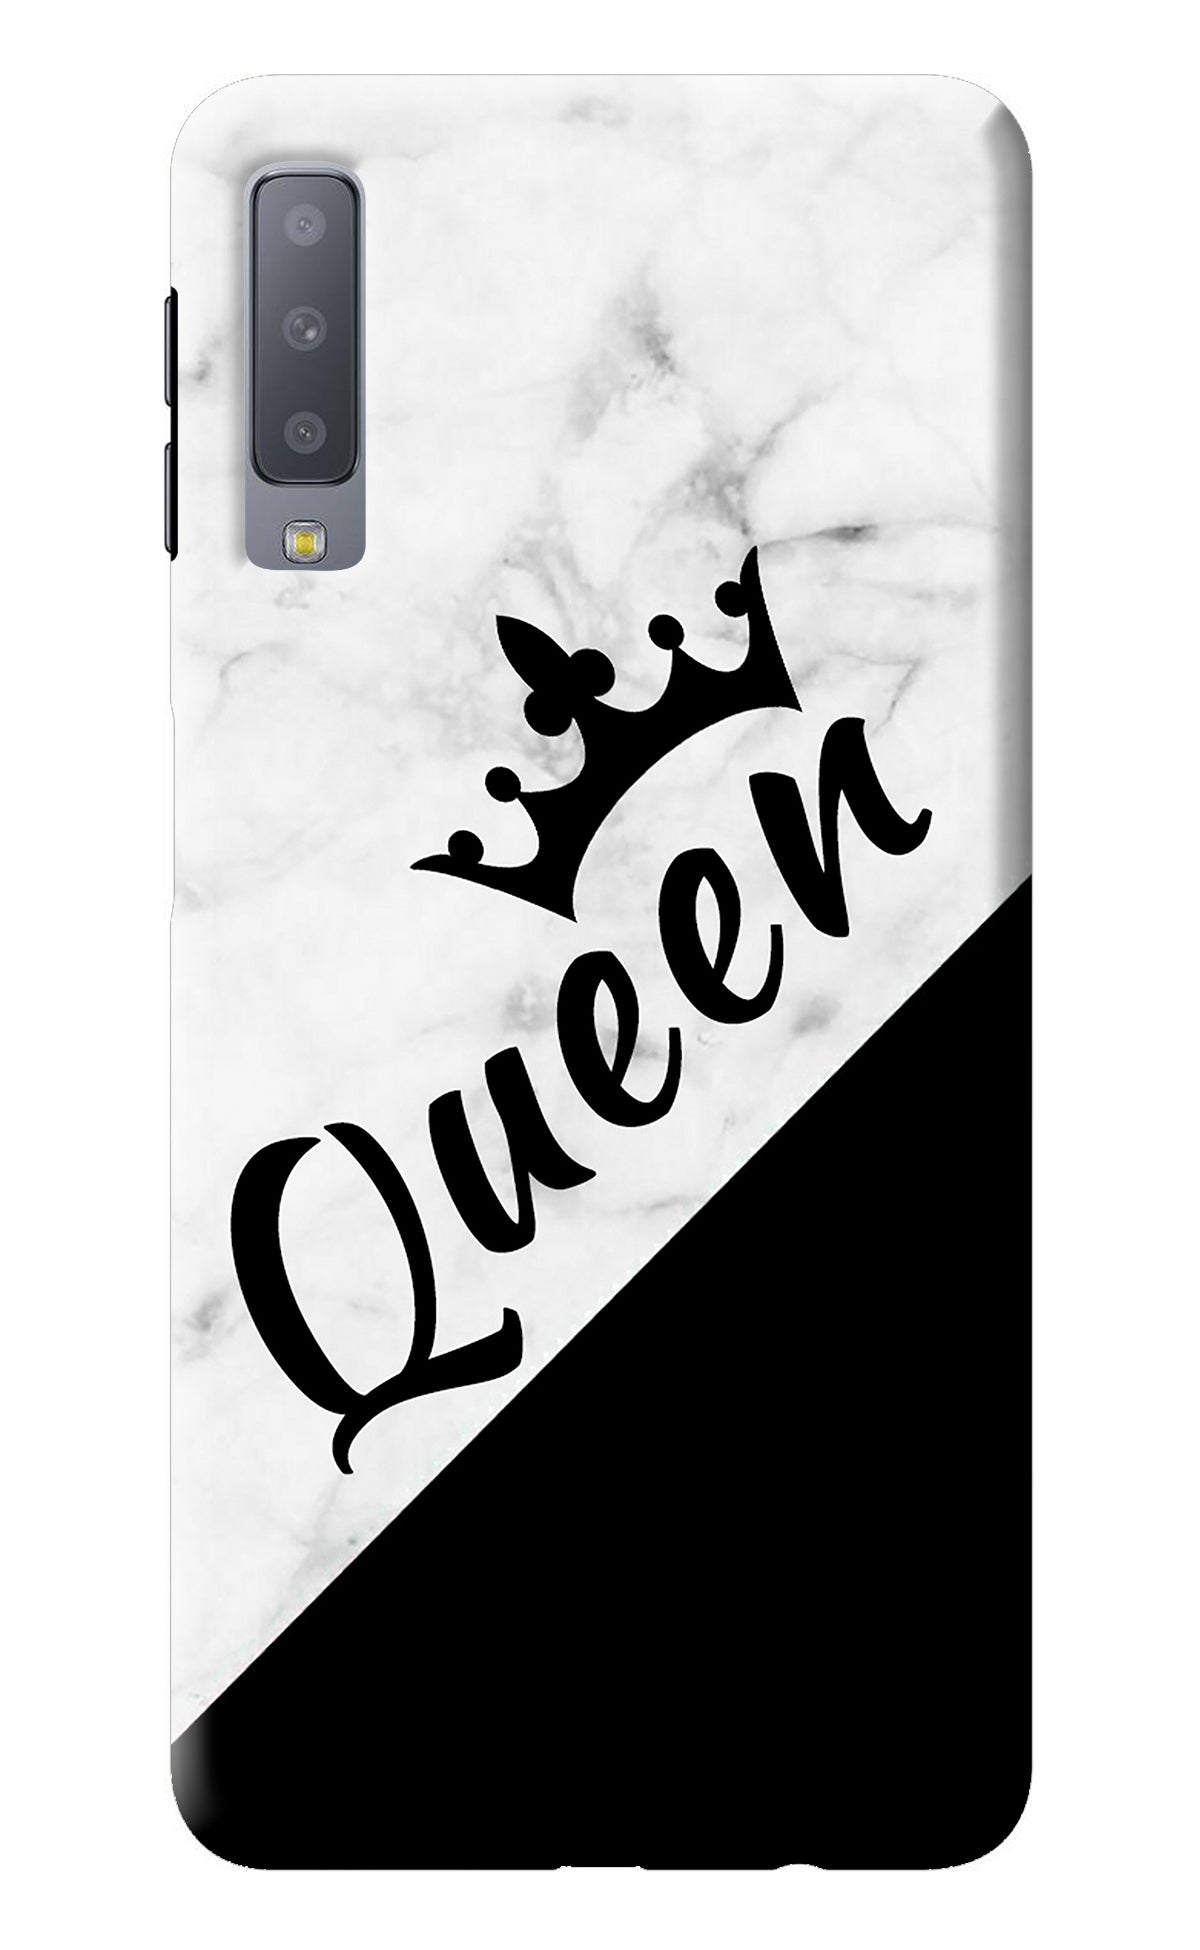 Queen Samsung A7 Back Cover